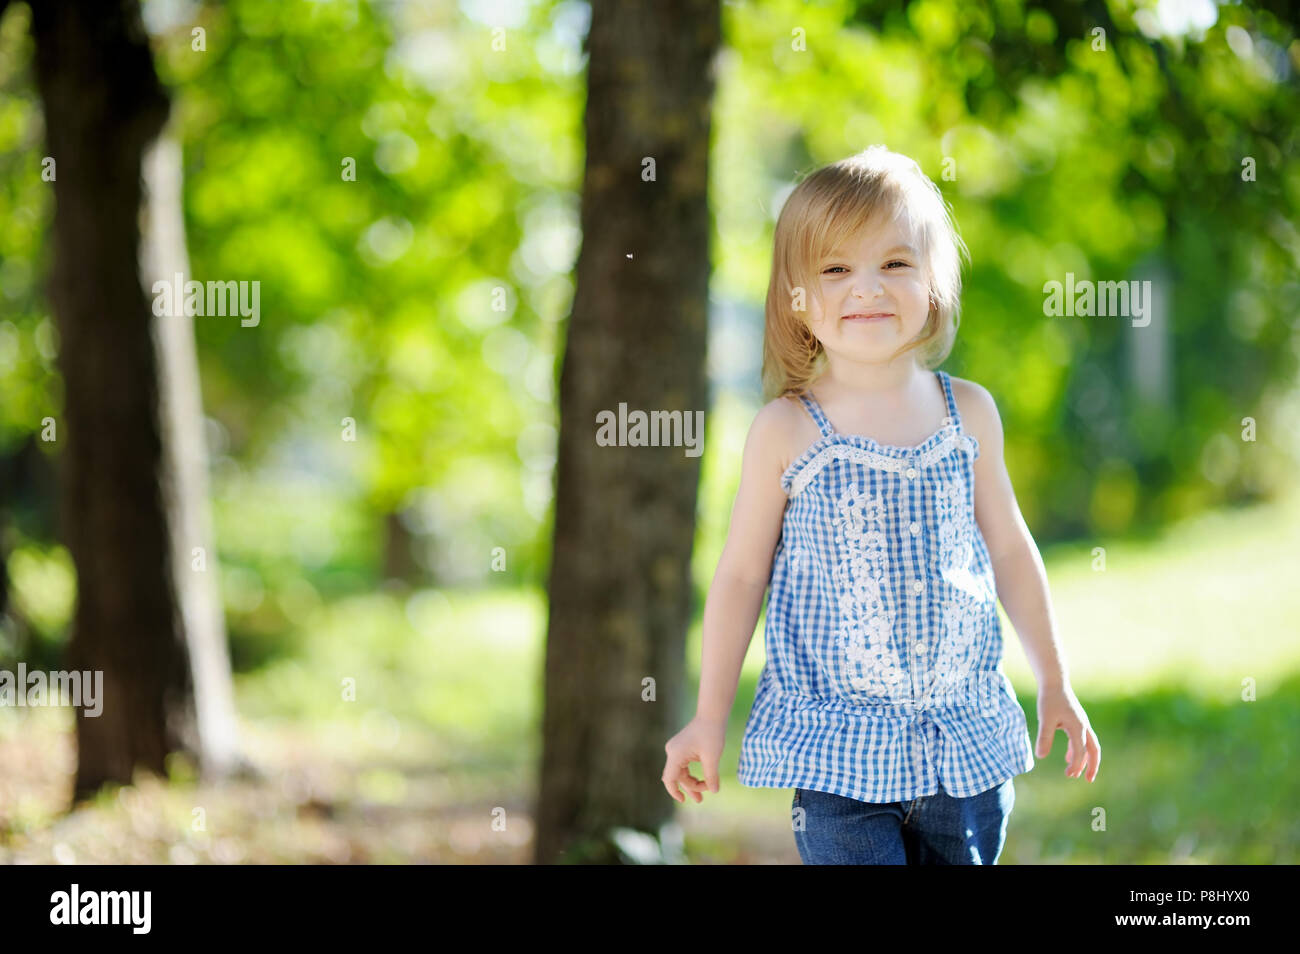 Adorable little girl smiling outdoors Stock Photo - Alamy